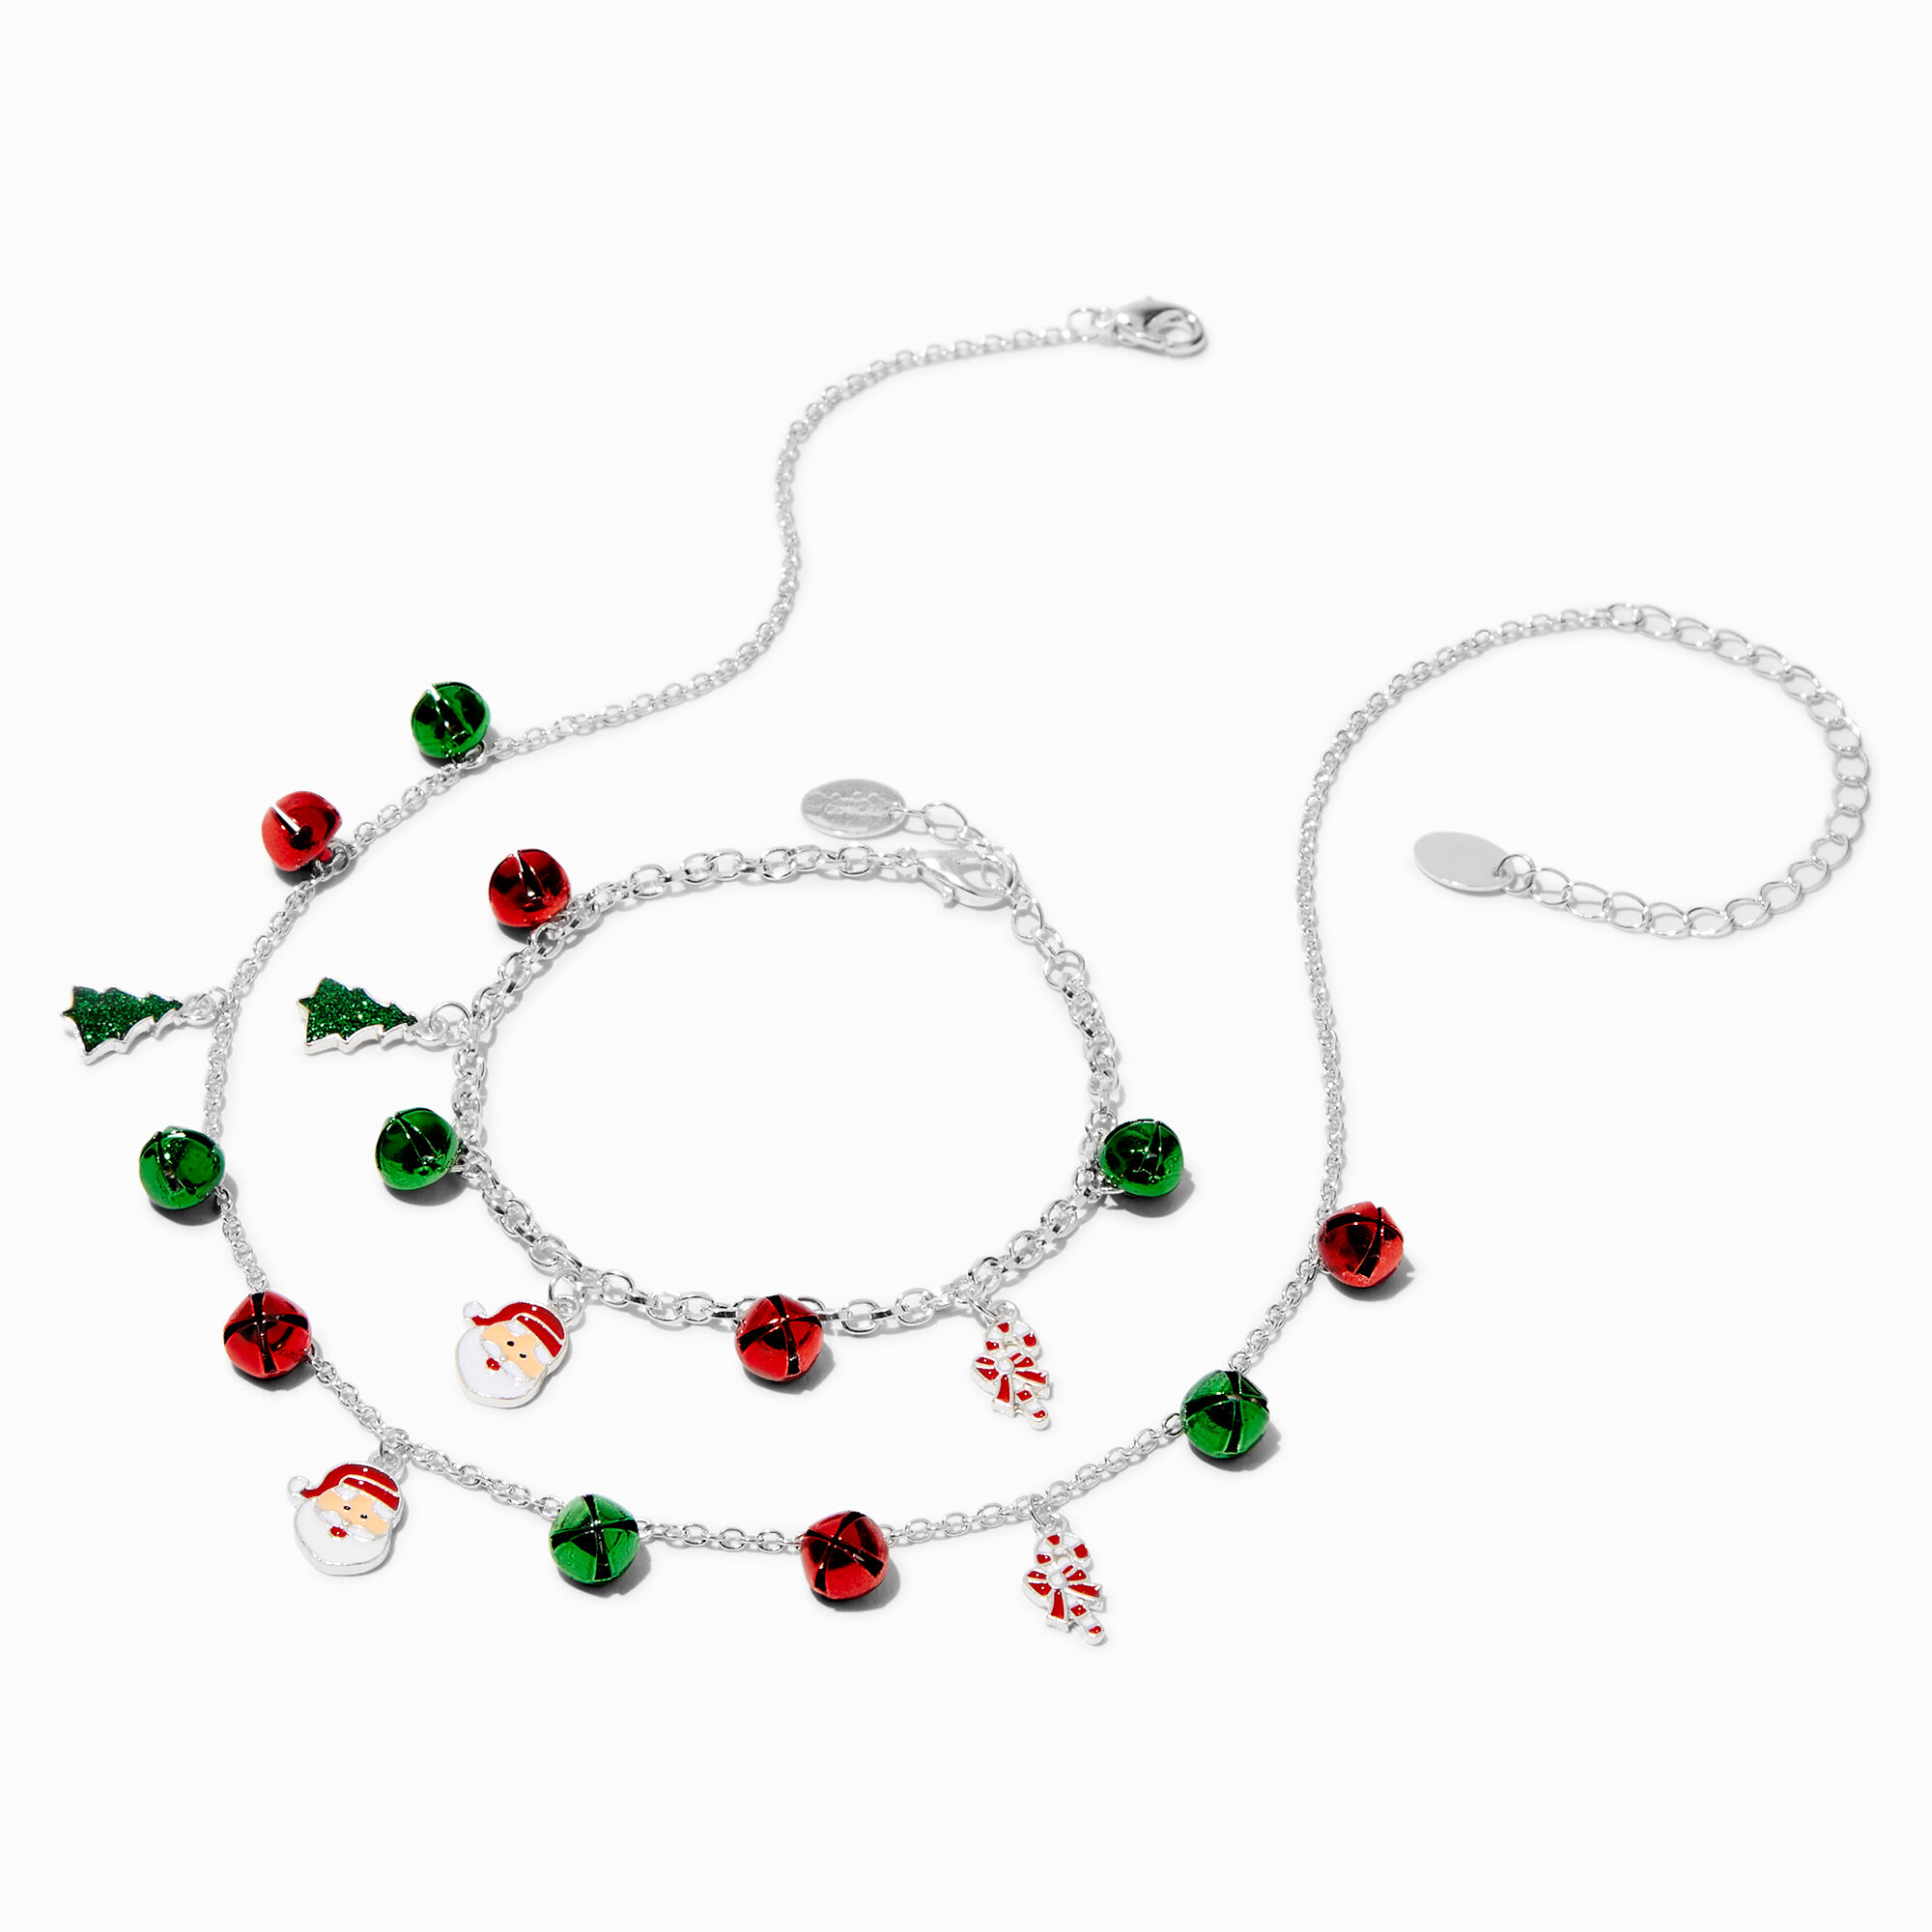 View Claires Christmas Charms Necklace Bracelet Set Silver information